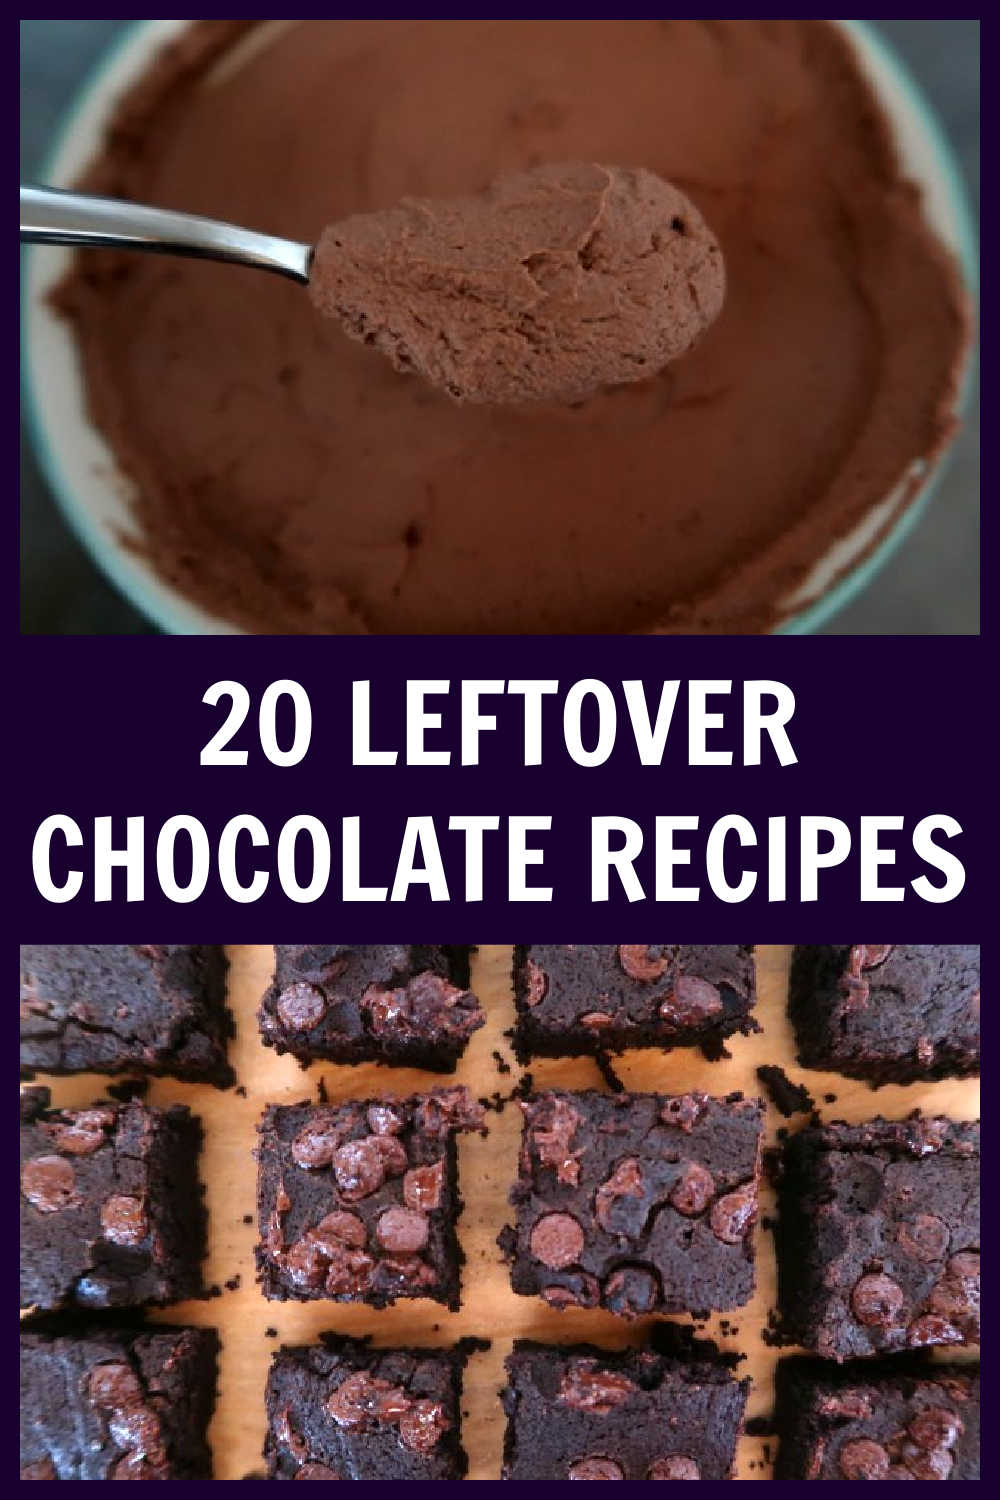 20 Leftover Chocolate Recipes - What to do with leftover Valentine's Day candy, chocolate bars, unwanted Easter Eggs, celebration chocolates, Halloween and Christmas chocolates.